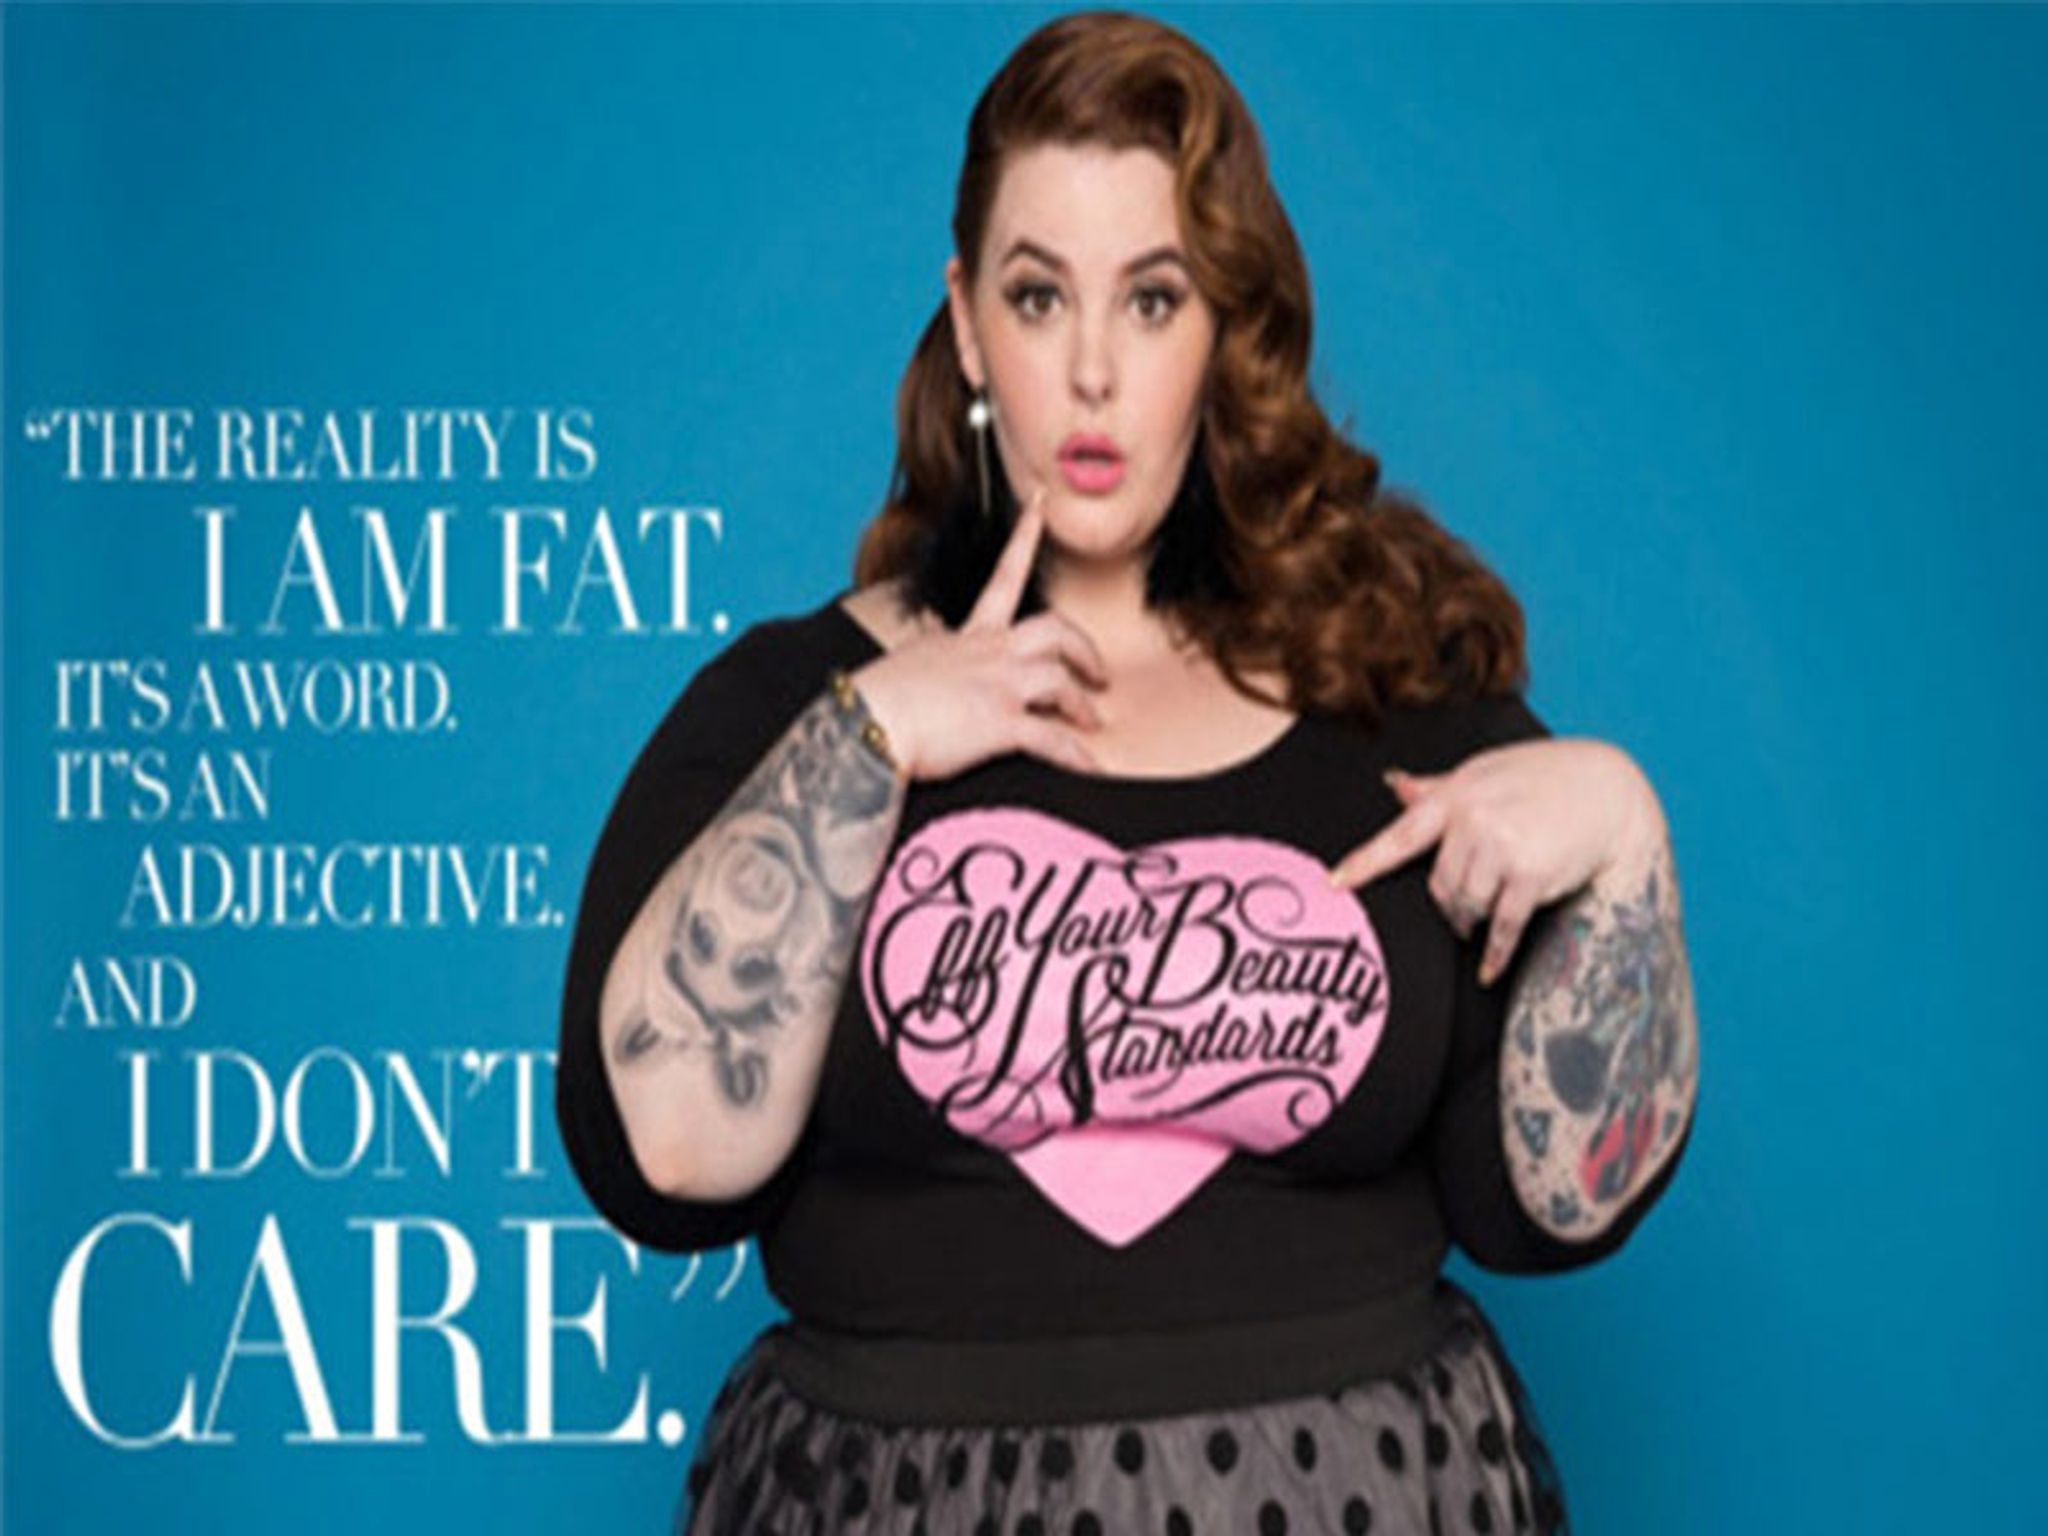 Tess Holliday x Fashion To Figure Streetwear Collection